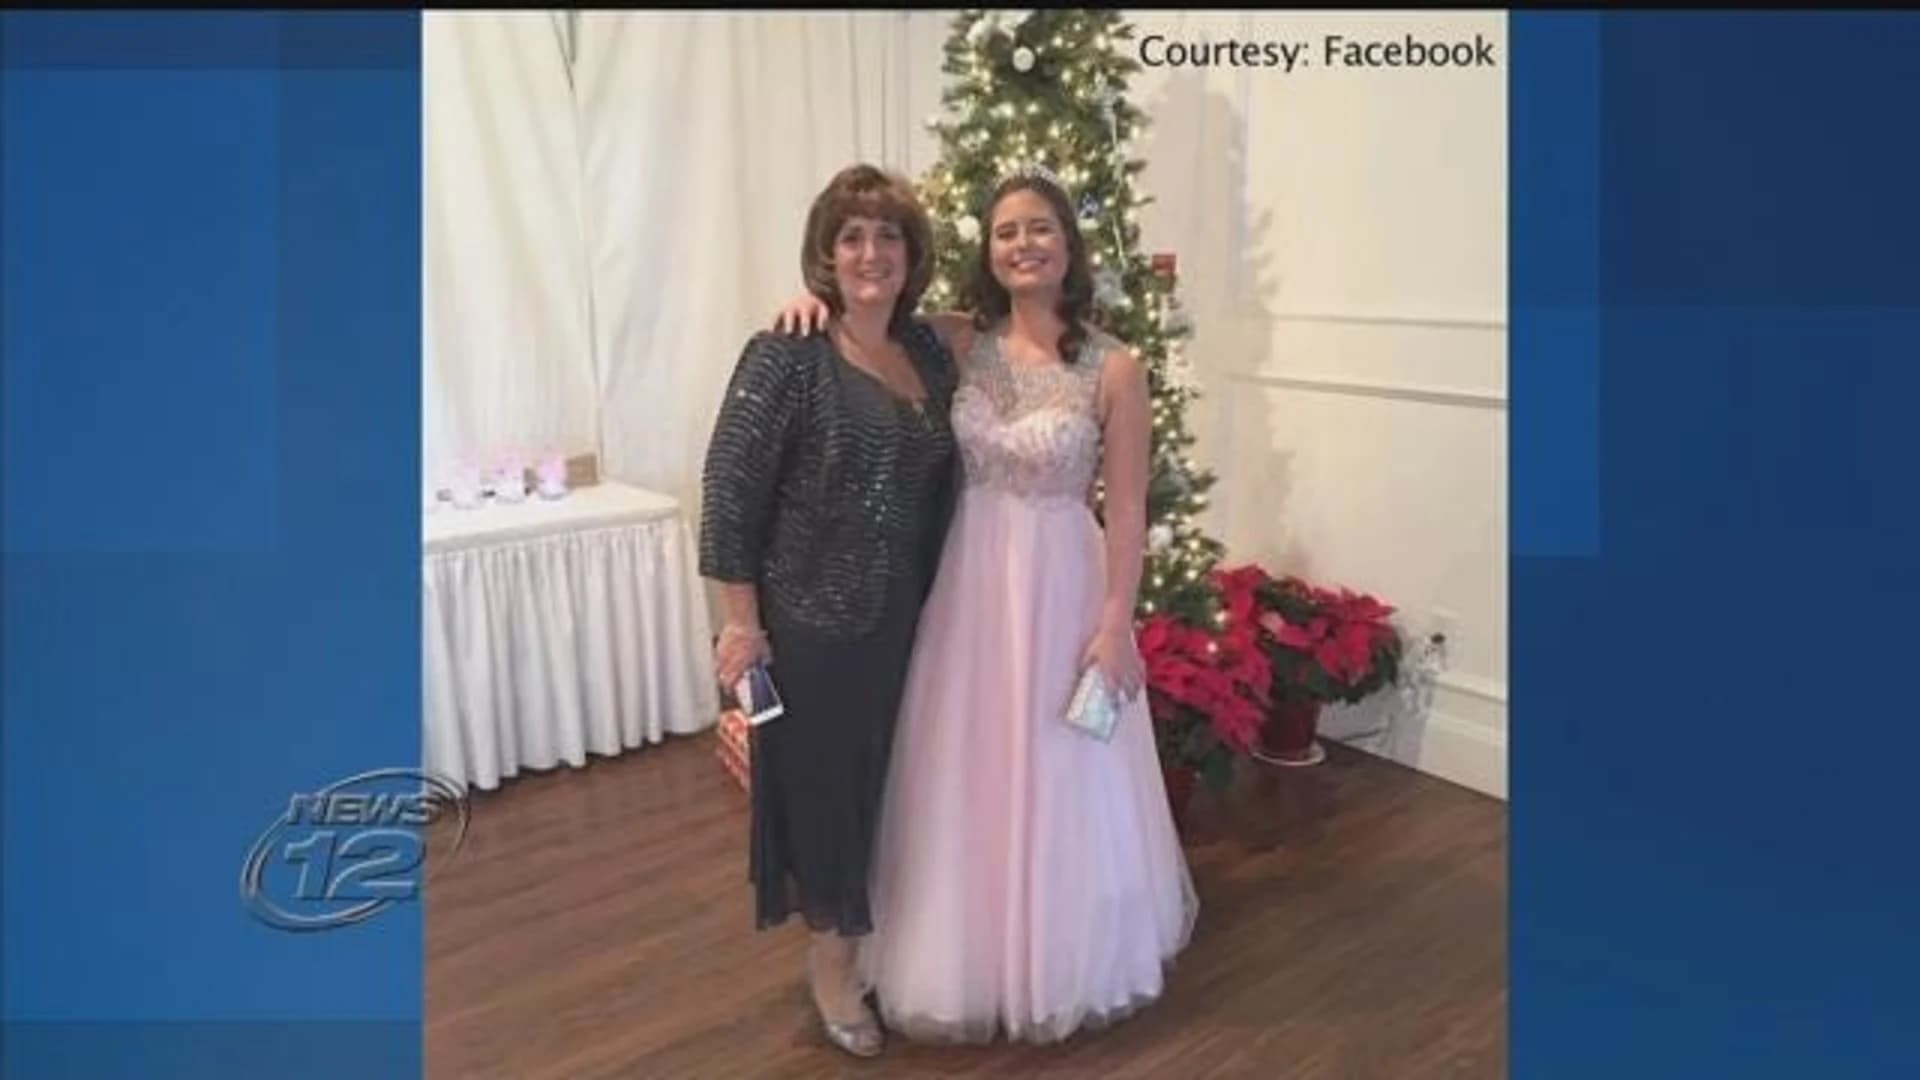 Mom killed, daughter remains hospitalized after being struck by car